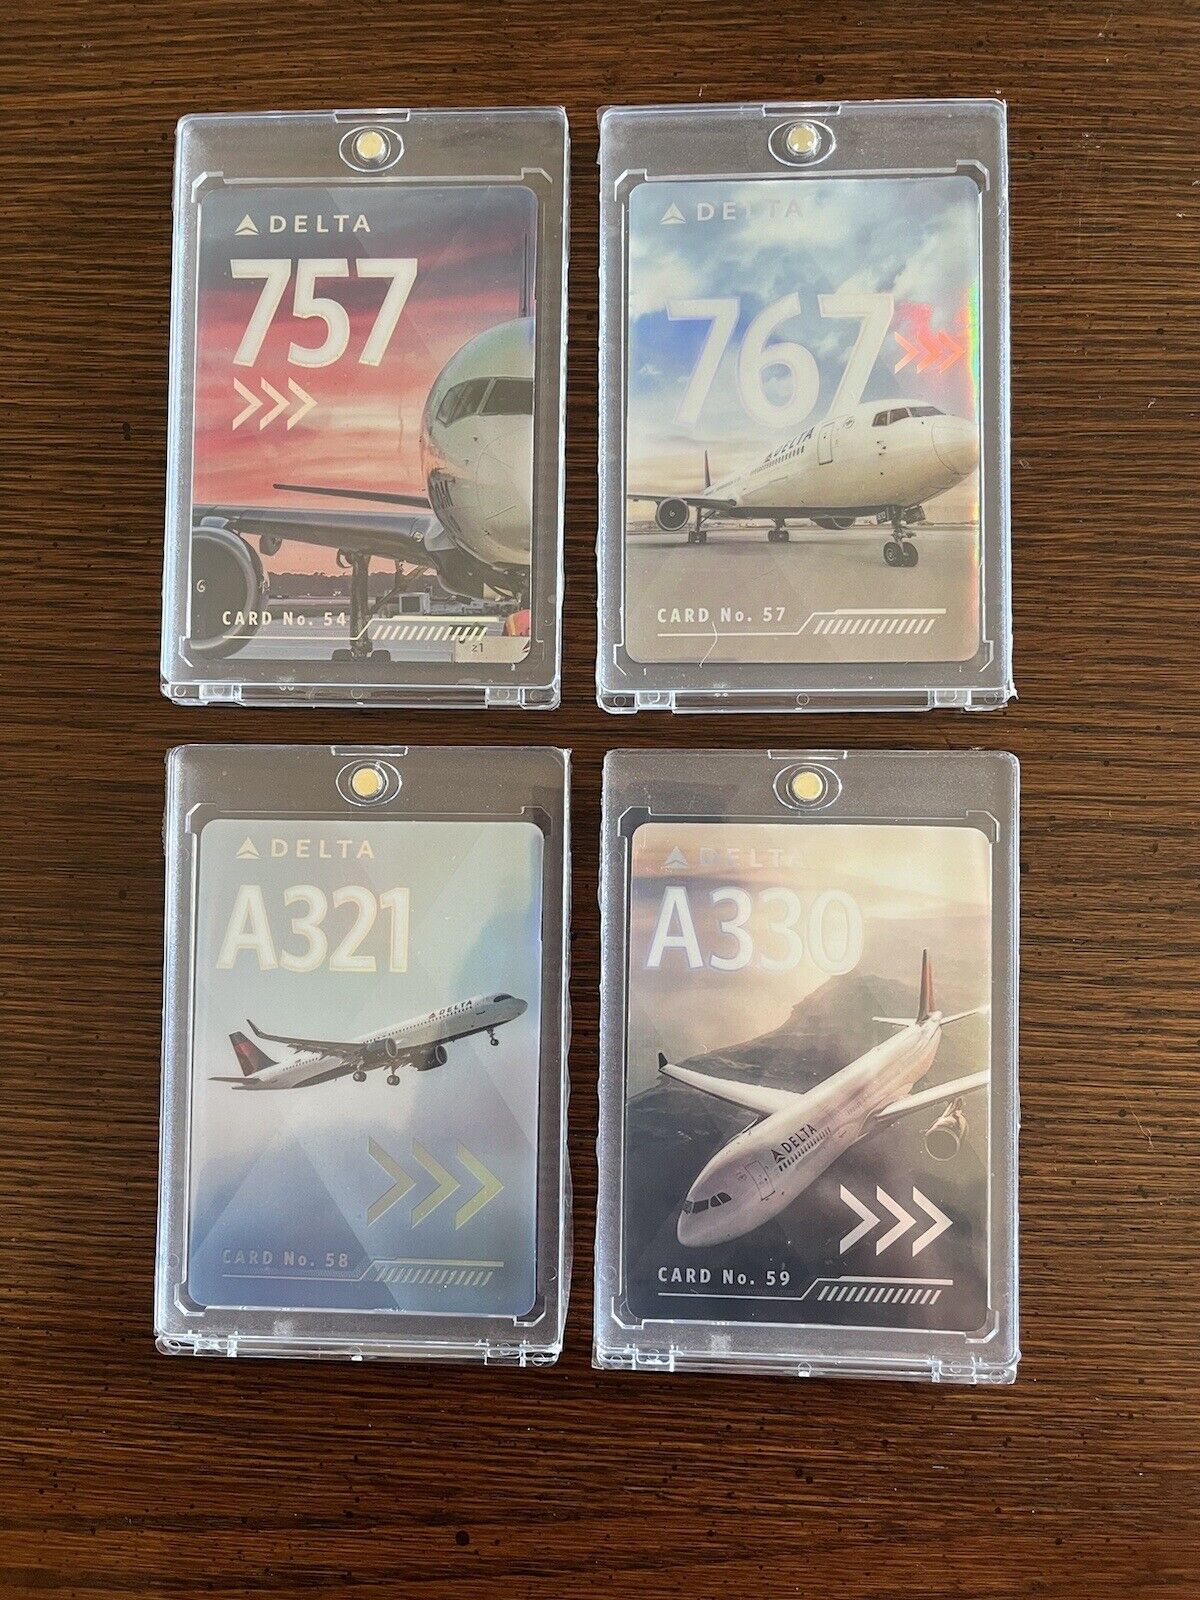 Delta Airlines pilot trading cards B-757, B767, A321, A330